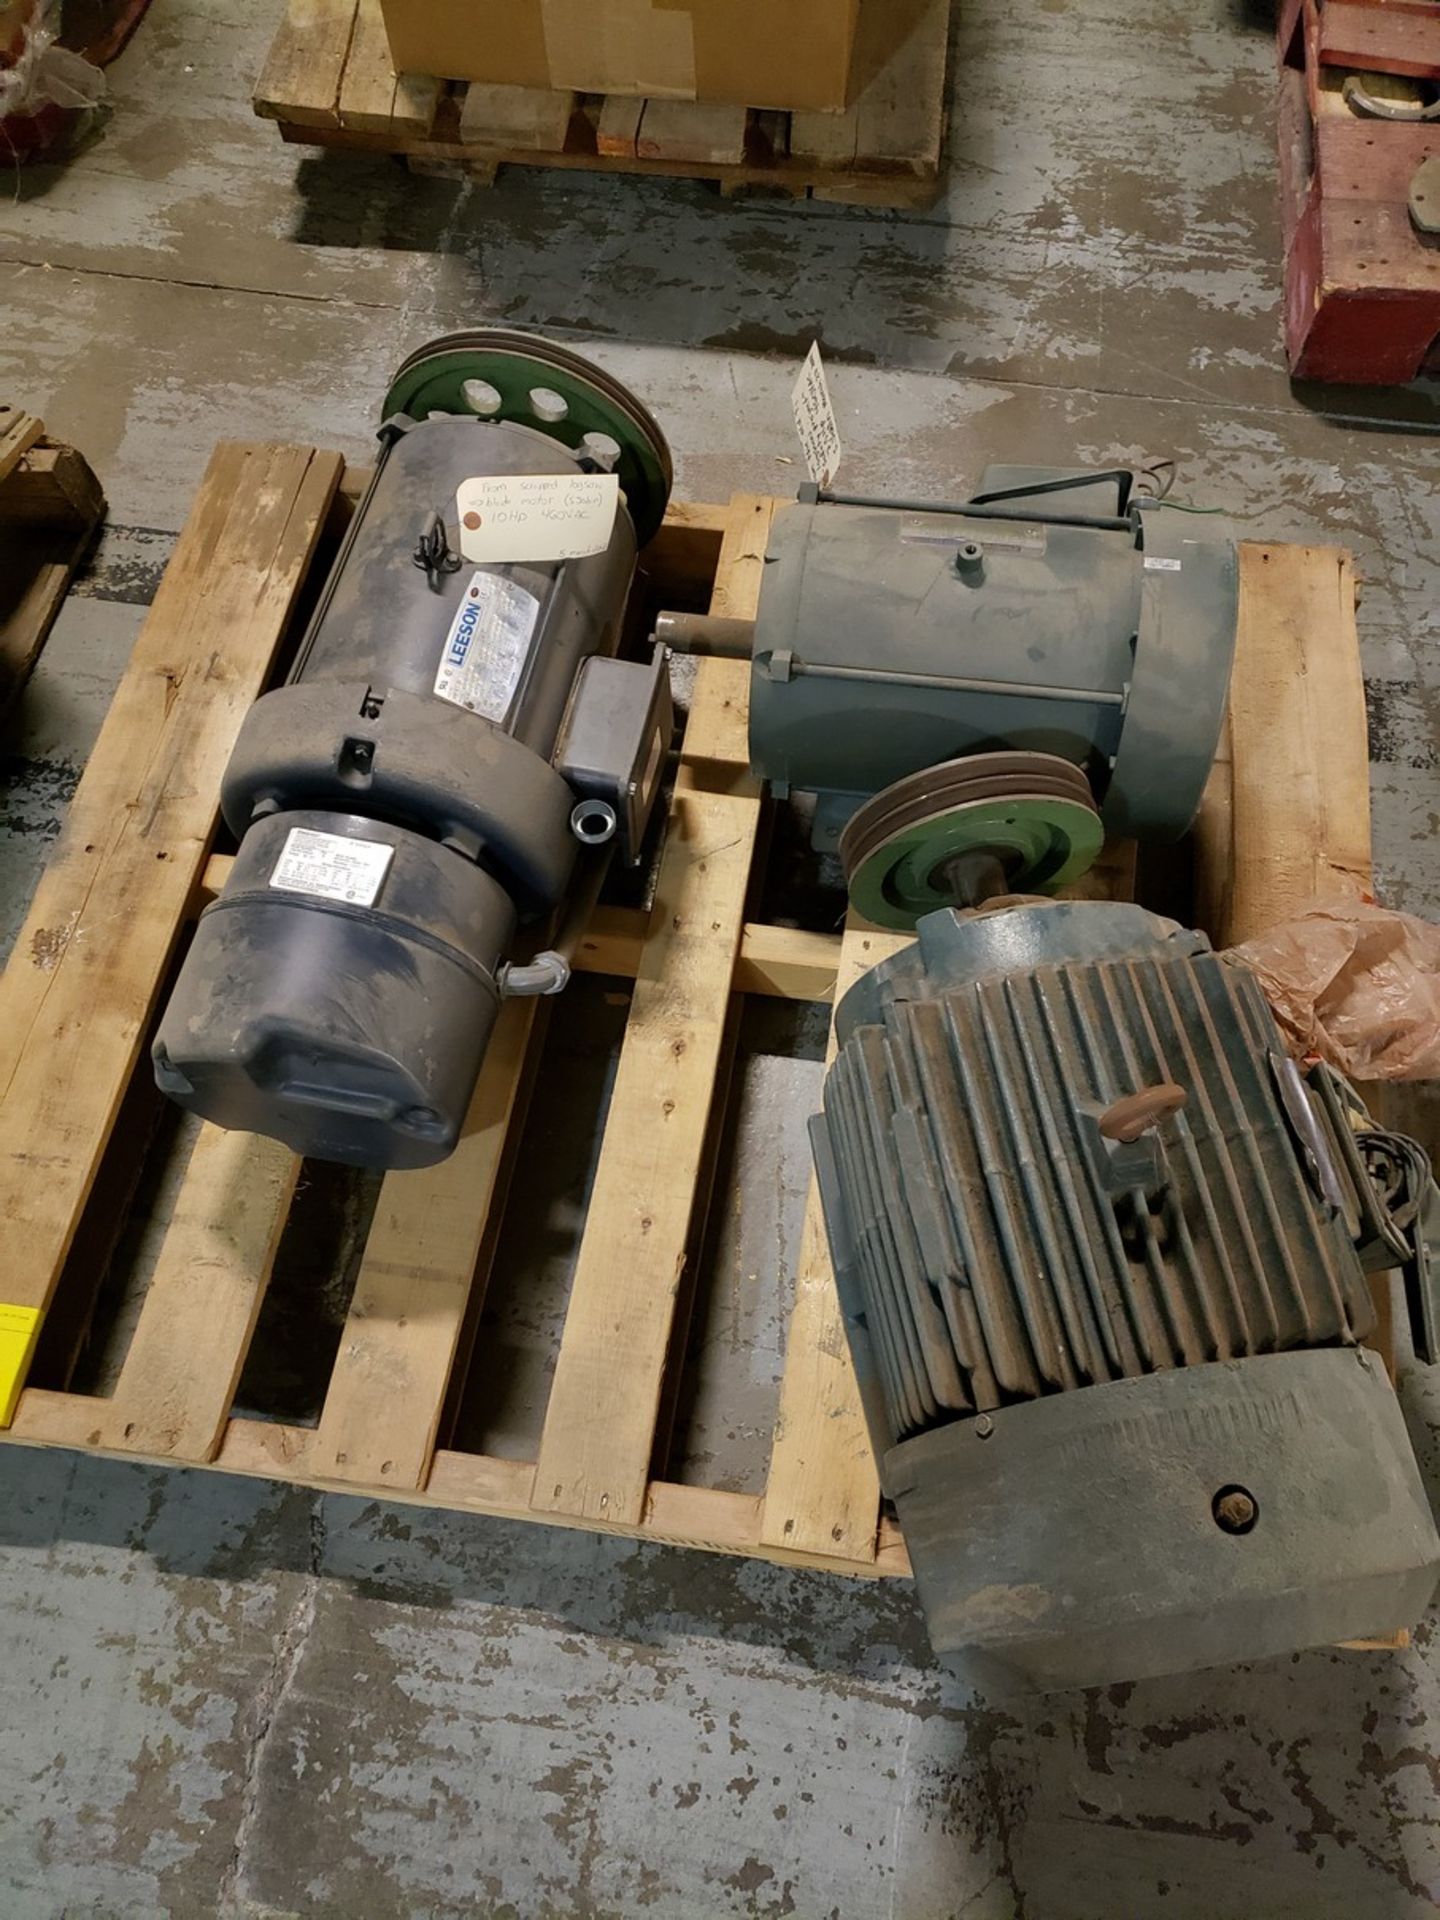 PALLET WITH 3 MOTORS, LEESON 10.75 HP W/ STEARNS BRAKE ATTACHED, RELIANCE ELECTRIC MOTOR 7.5 HP, AND